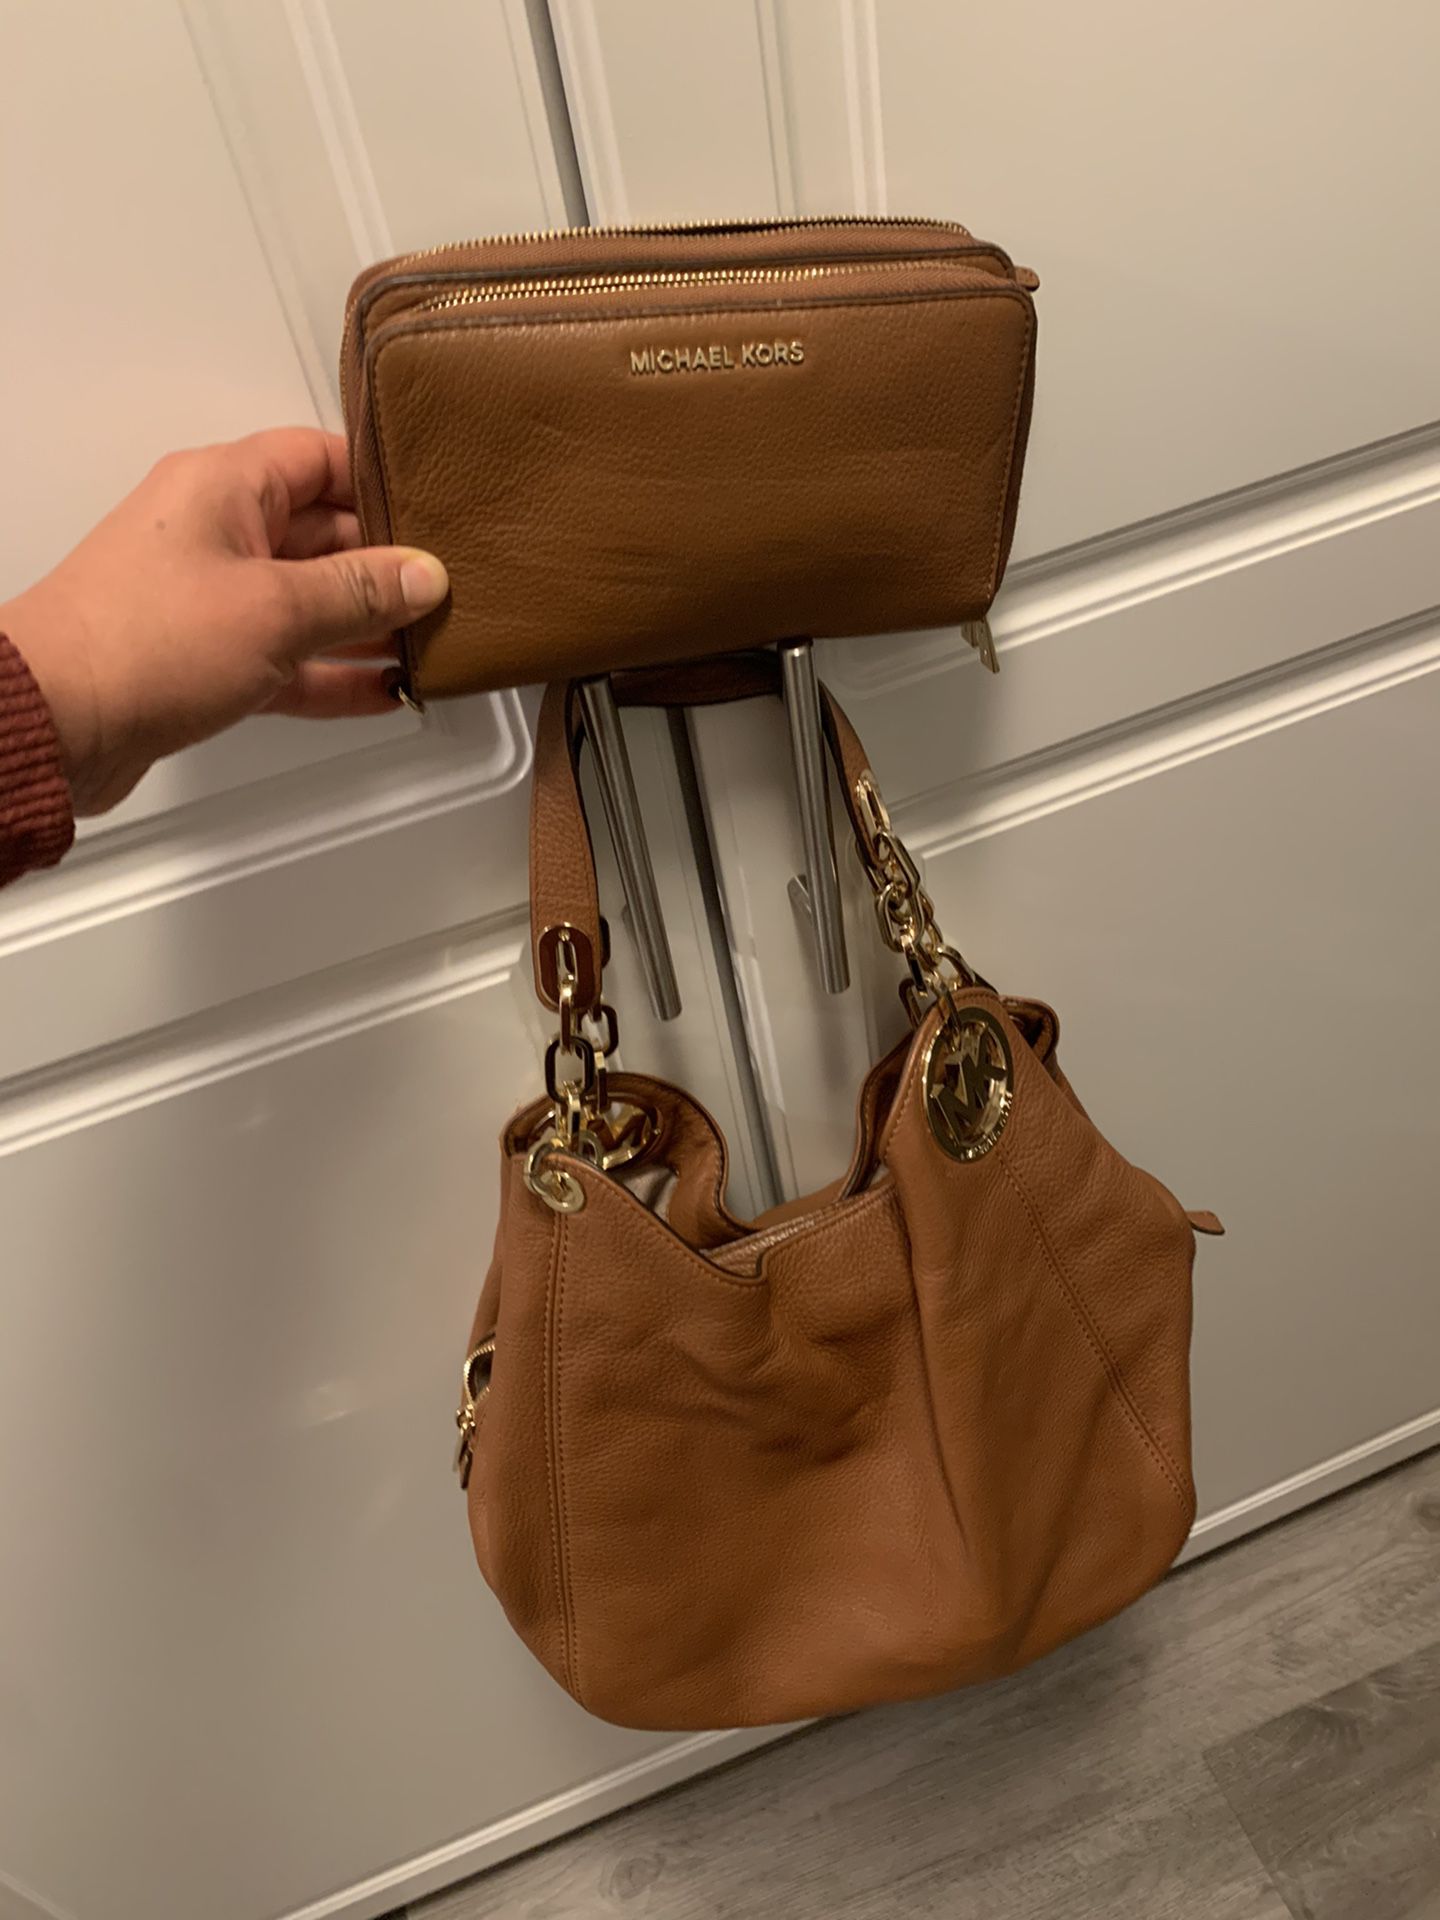 Michael Kors purse with matching wallet